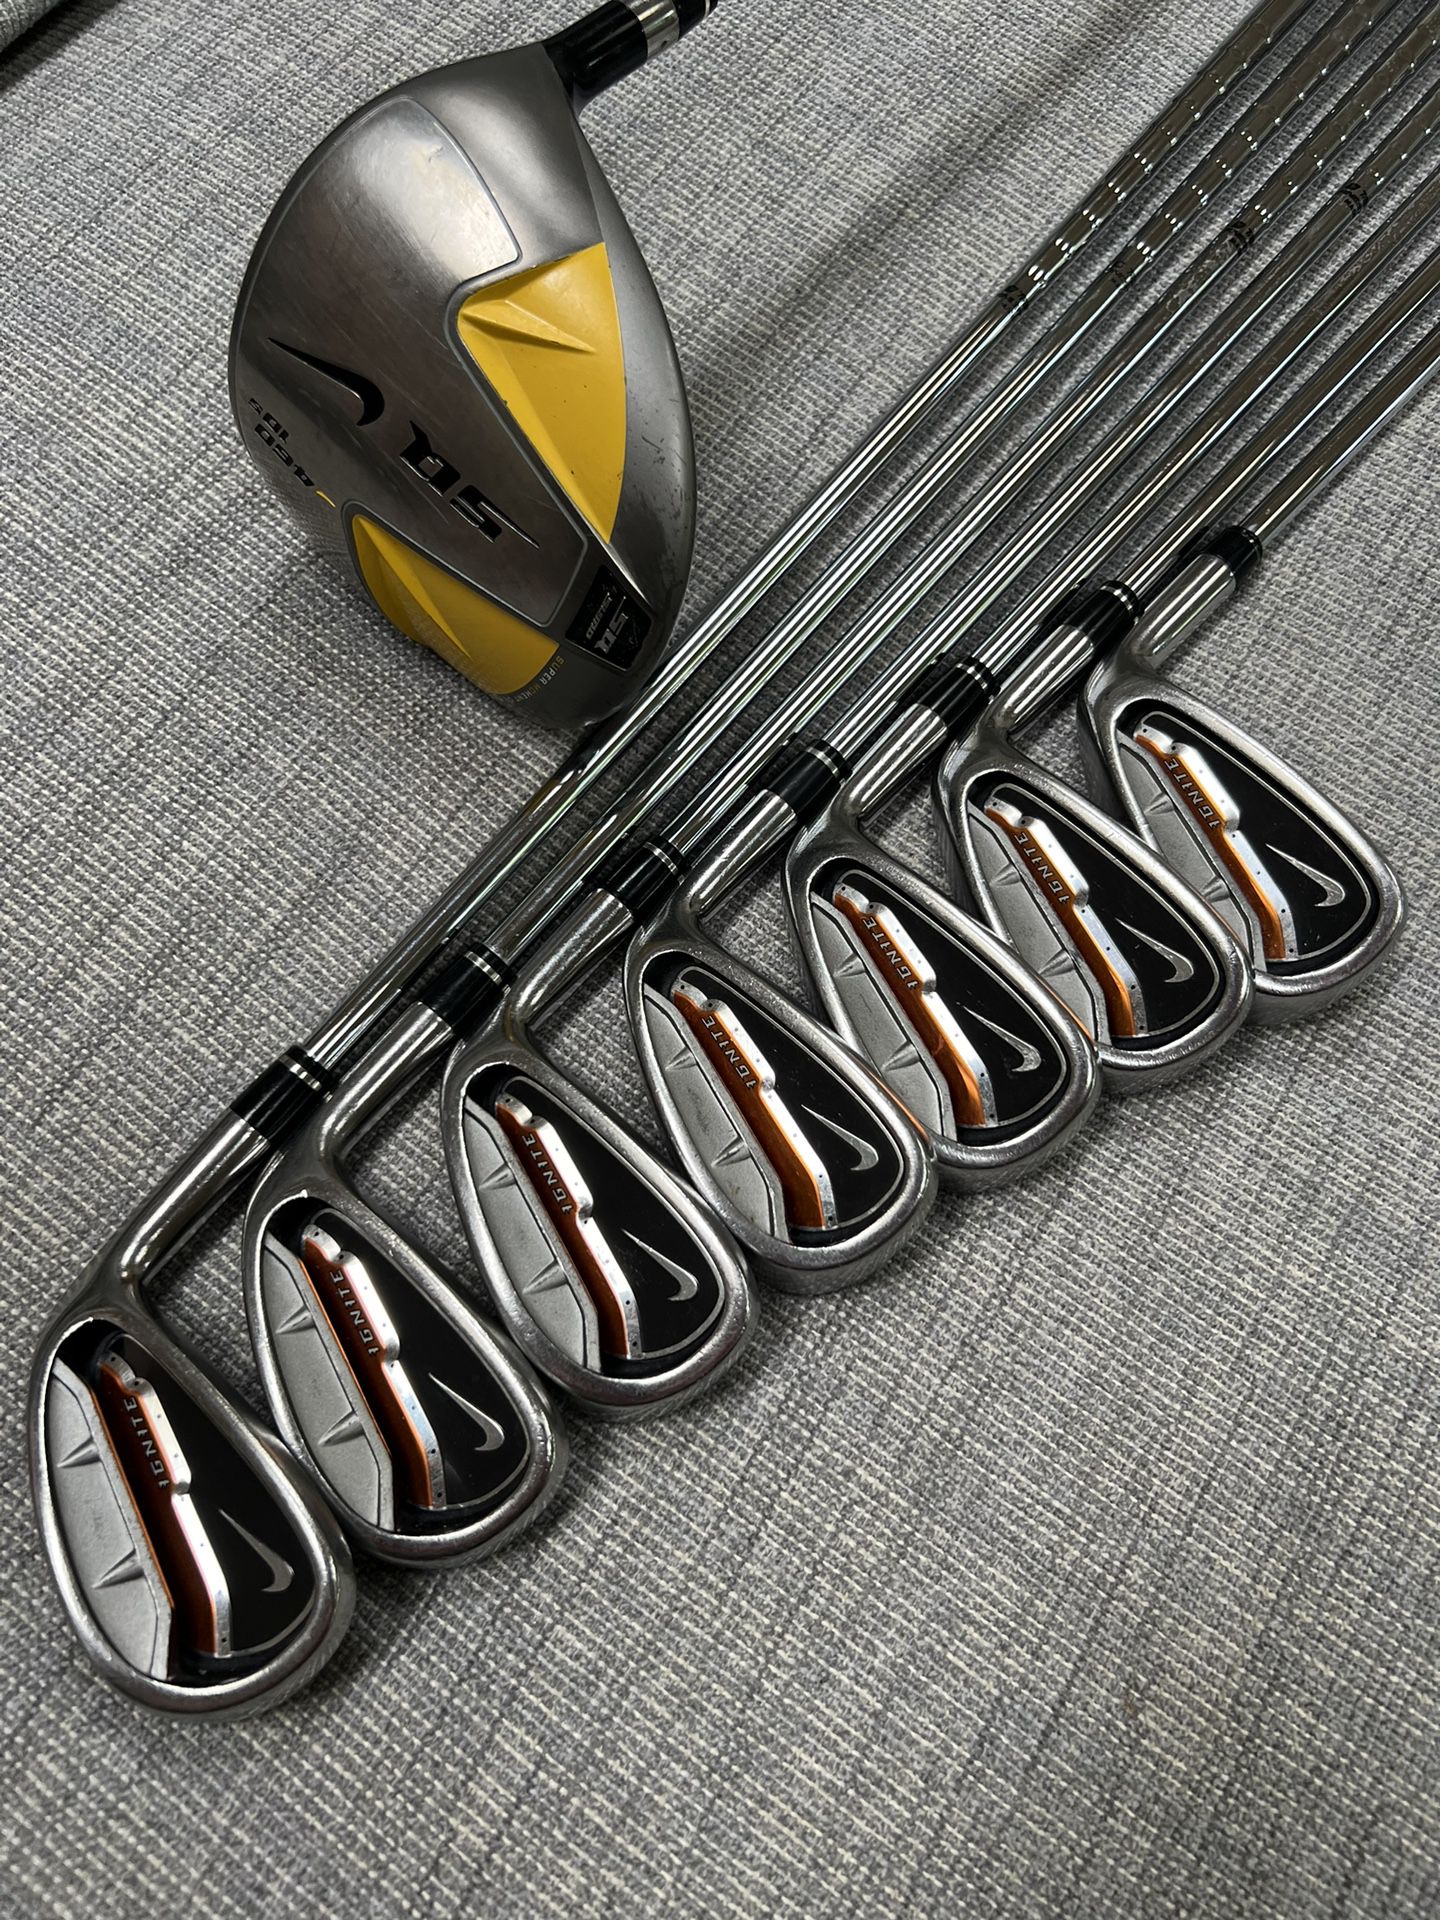 Nike Golf Clubs - Ignite Irons (4-PW) & Sasquatch SUMO 10.5° Driver (right-handed)